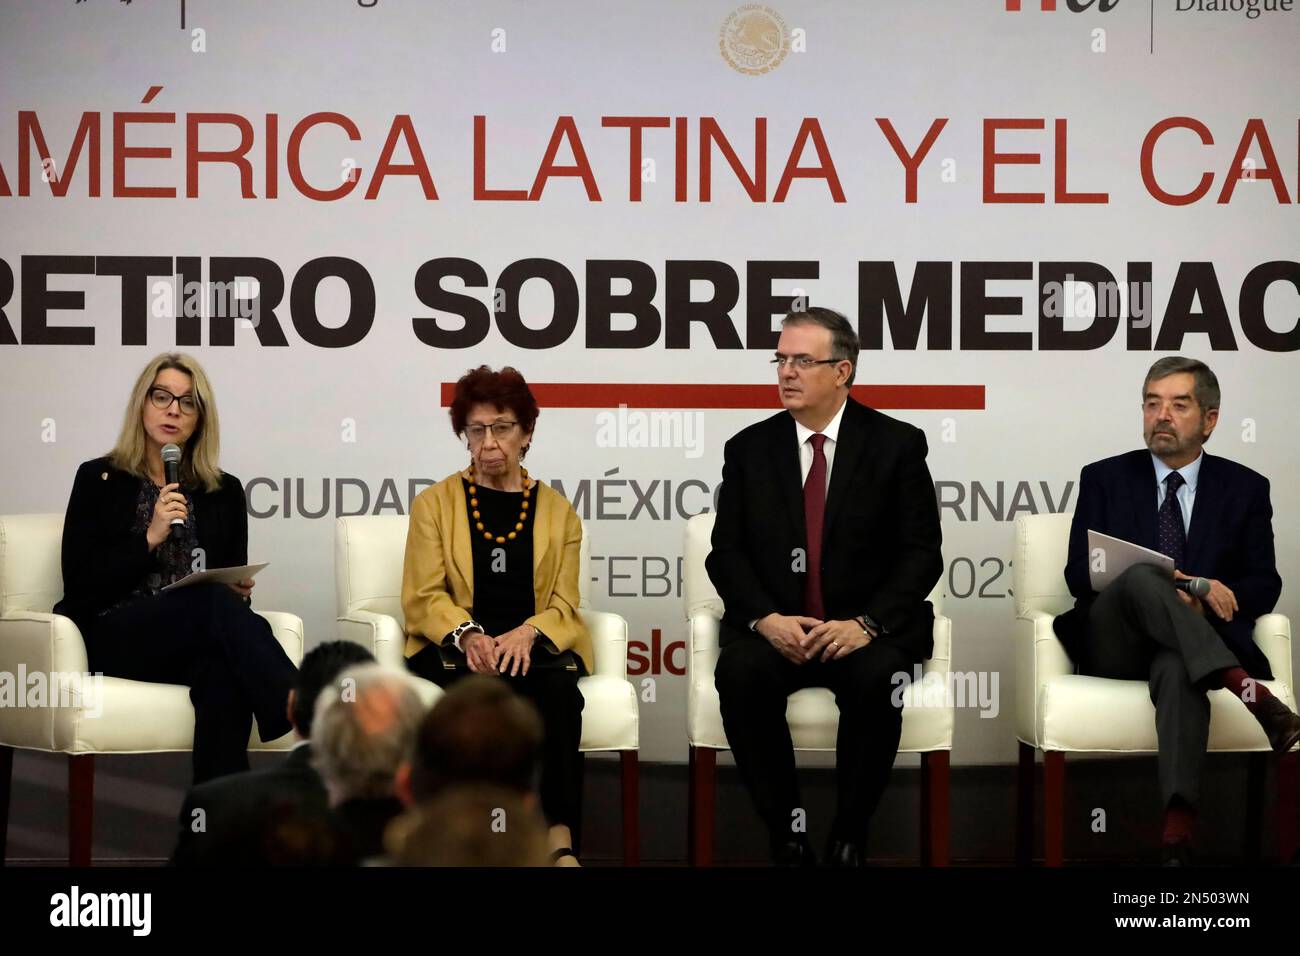 February 8, 2023, Mexico City, Mexico: The Norwegian ambassador to Mexico, Ragnhild Imerslund; the Undersecretary of Foreign Relations of Mexico, Carmen Moreno Toscano; the foreign minister of Mexico, Marcelo Ebrard and the representative of Mexico to the United Nations, Juan Ramon de la Fuente at the inauguration of the Retreat on Mediation 'Latin America and the Caribbean' at the Ministry of Foreign Affairs in Mexico City. on February 8, 2023 in Mexico City, Mexico (Photo by Luis Barron / Eyepix Group). Stock Photo